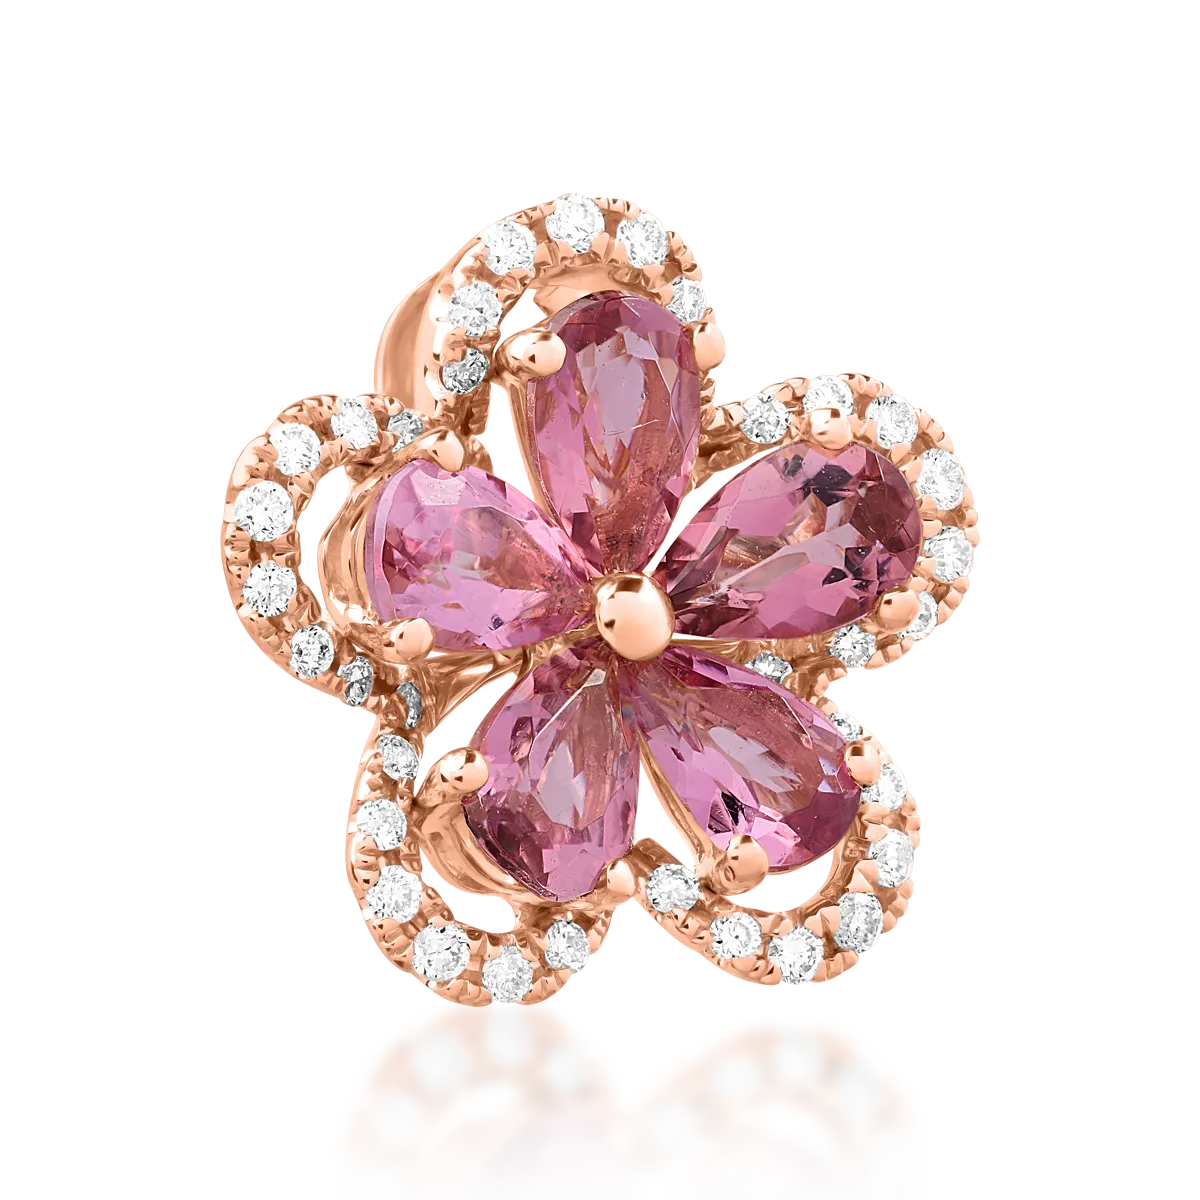 18K rose gold pendant with 0.9ct pink tourmaline and 0.15ct diamonds